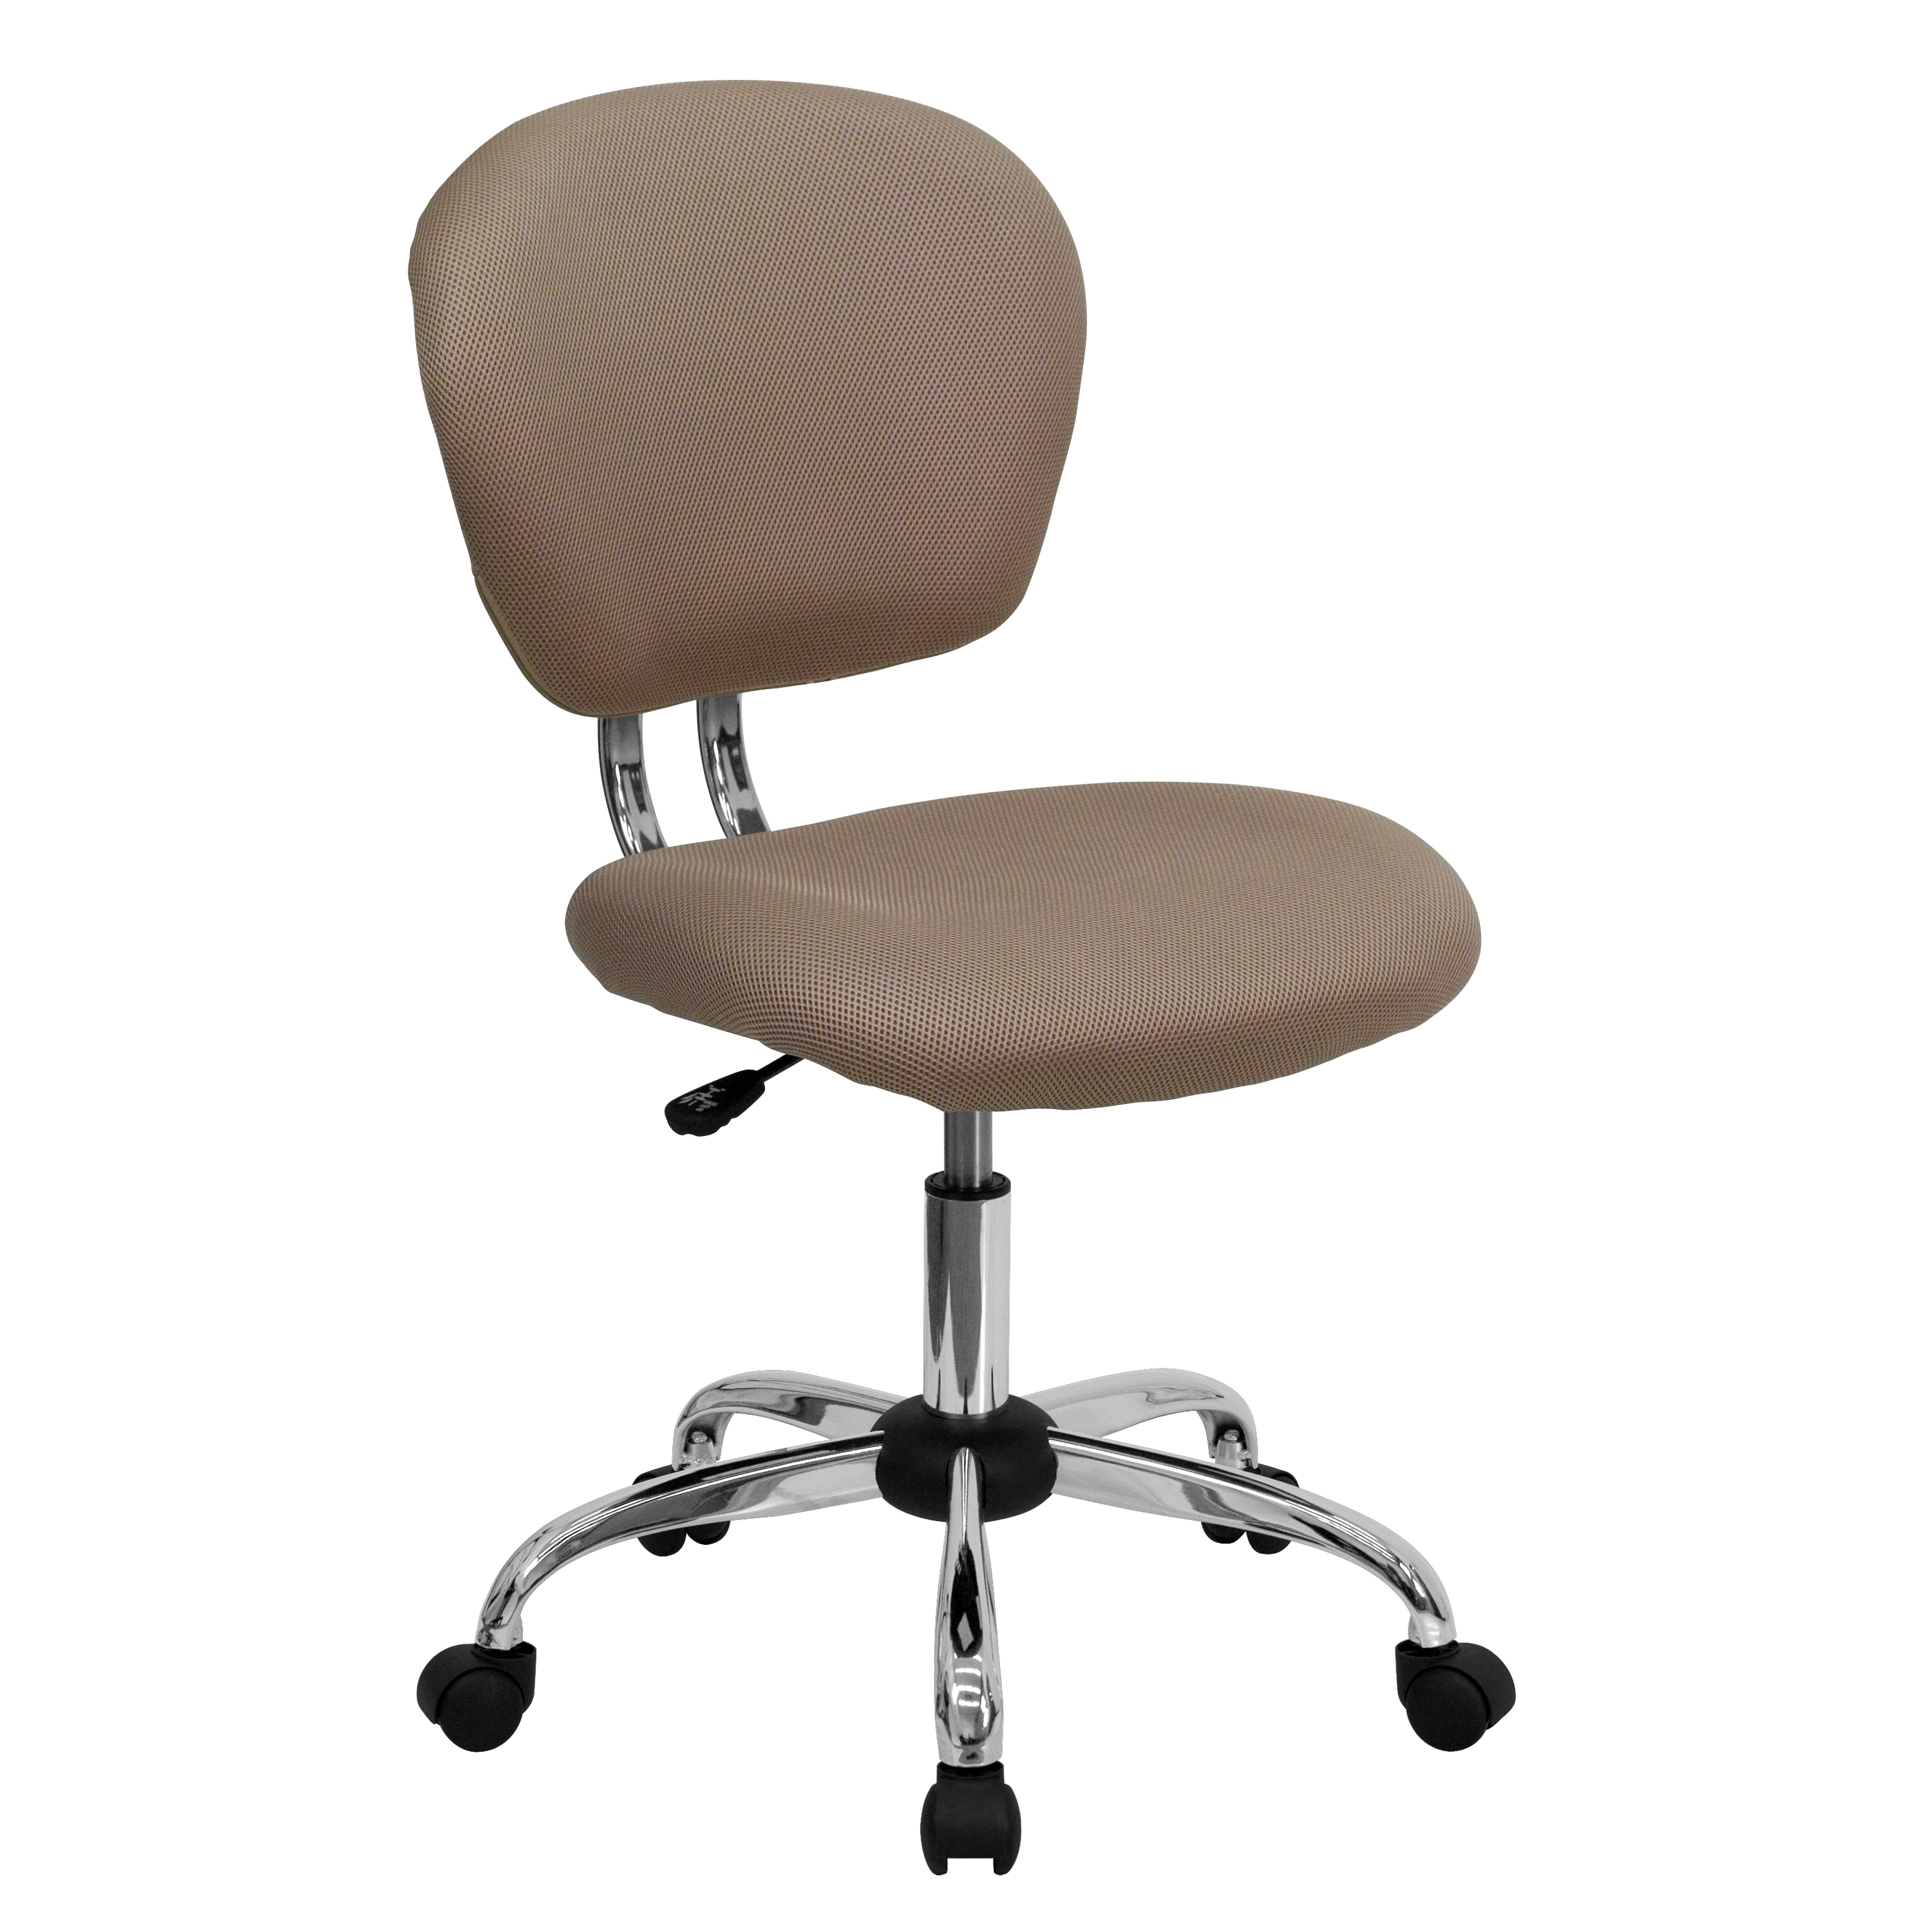 Emma + Oliver Mid-Back Coffee Brown Mesh Swivel Task Office Chair with Chrome Base - image 2 of 13